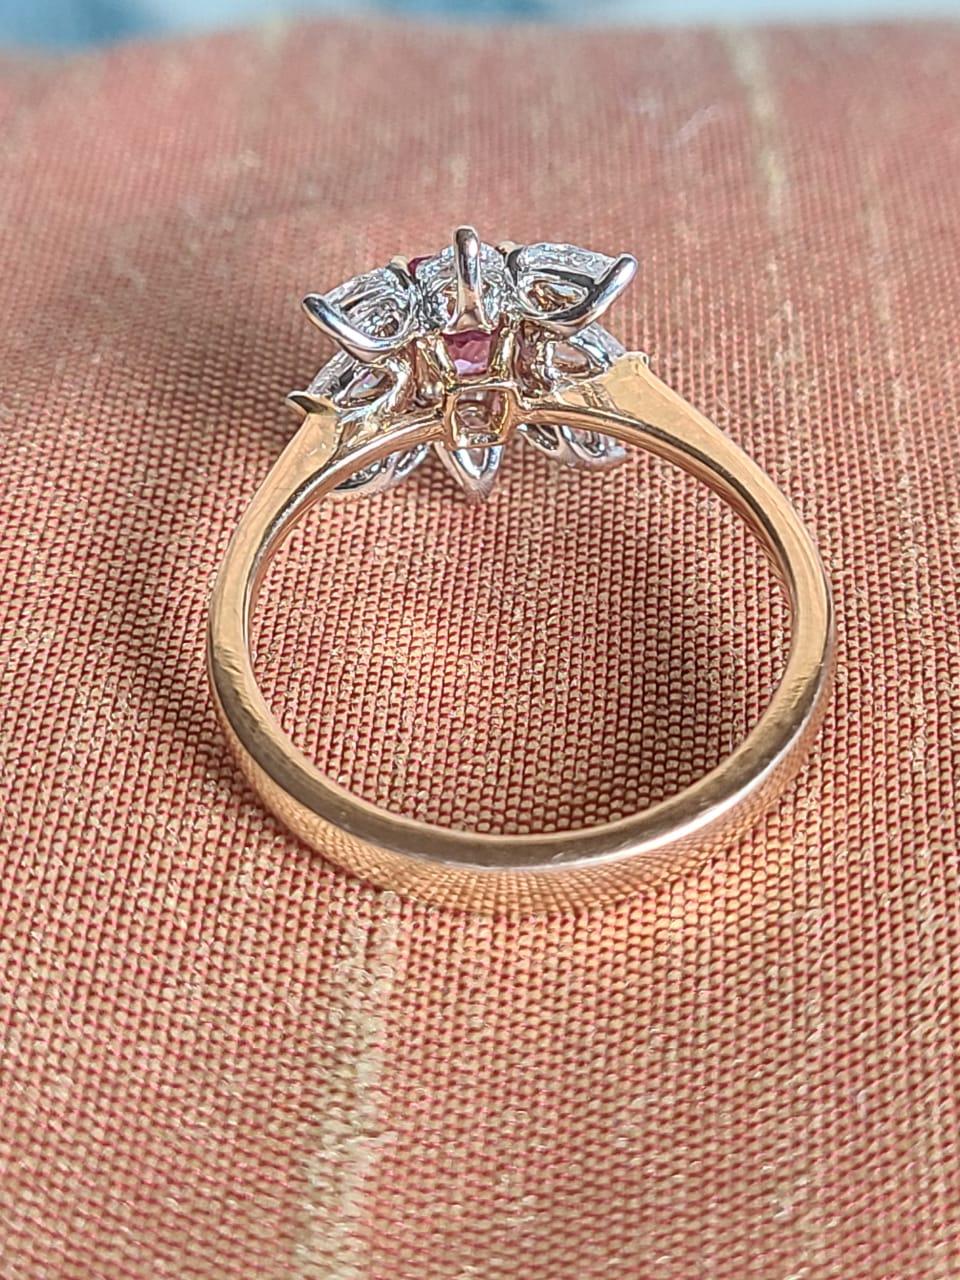 A very dainty and gorgeous Pink Sapphire Engagement Ring set in 18K Rose Gold & Diamonds. The weight of the Pink Sapphire is 0.71 carats. The weight of the Rose Cut Diamonds is 0.65 carats. Net Gold weight is 3.52 grams. The dimensions of the ring